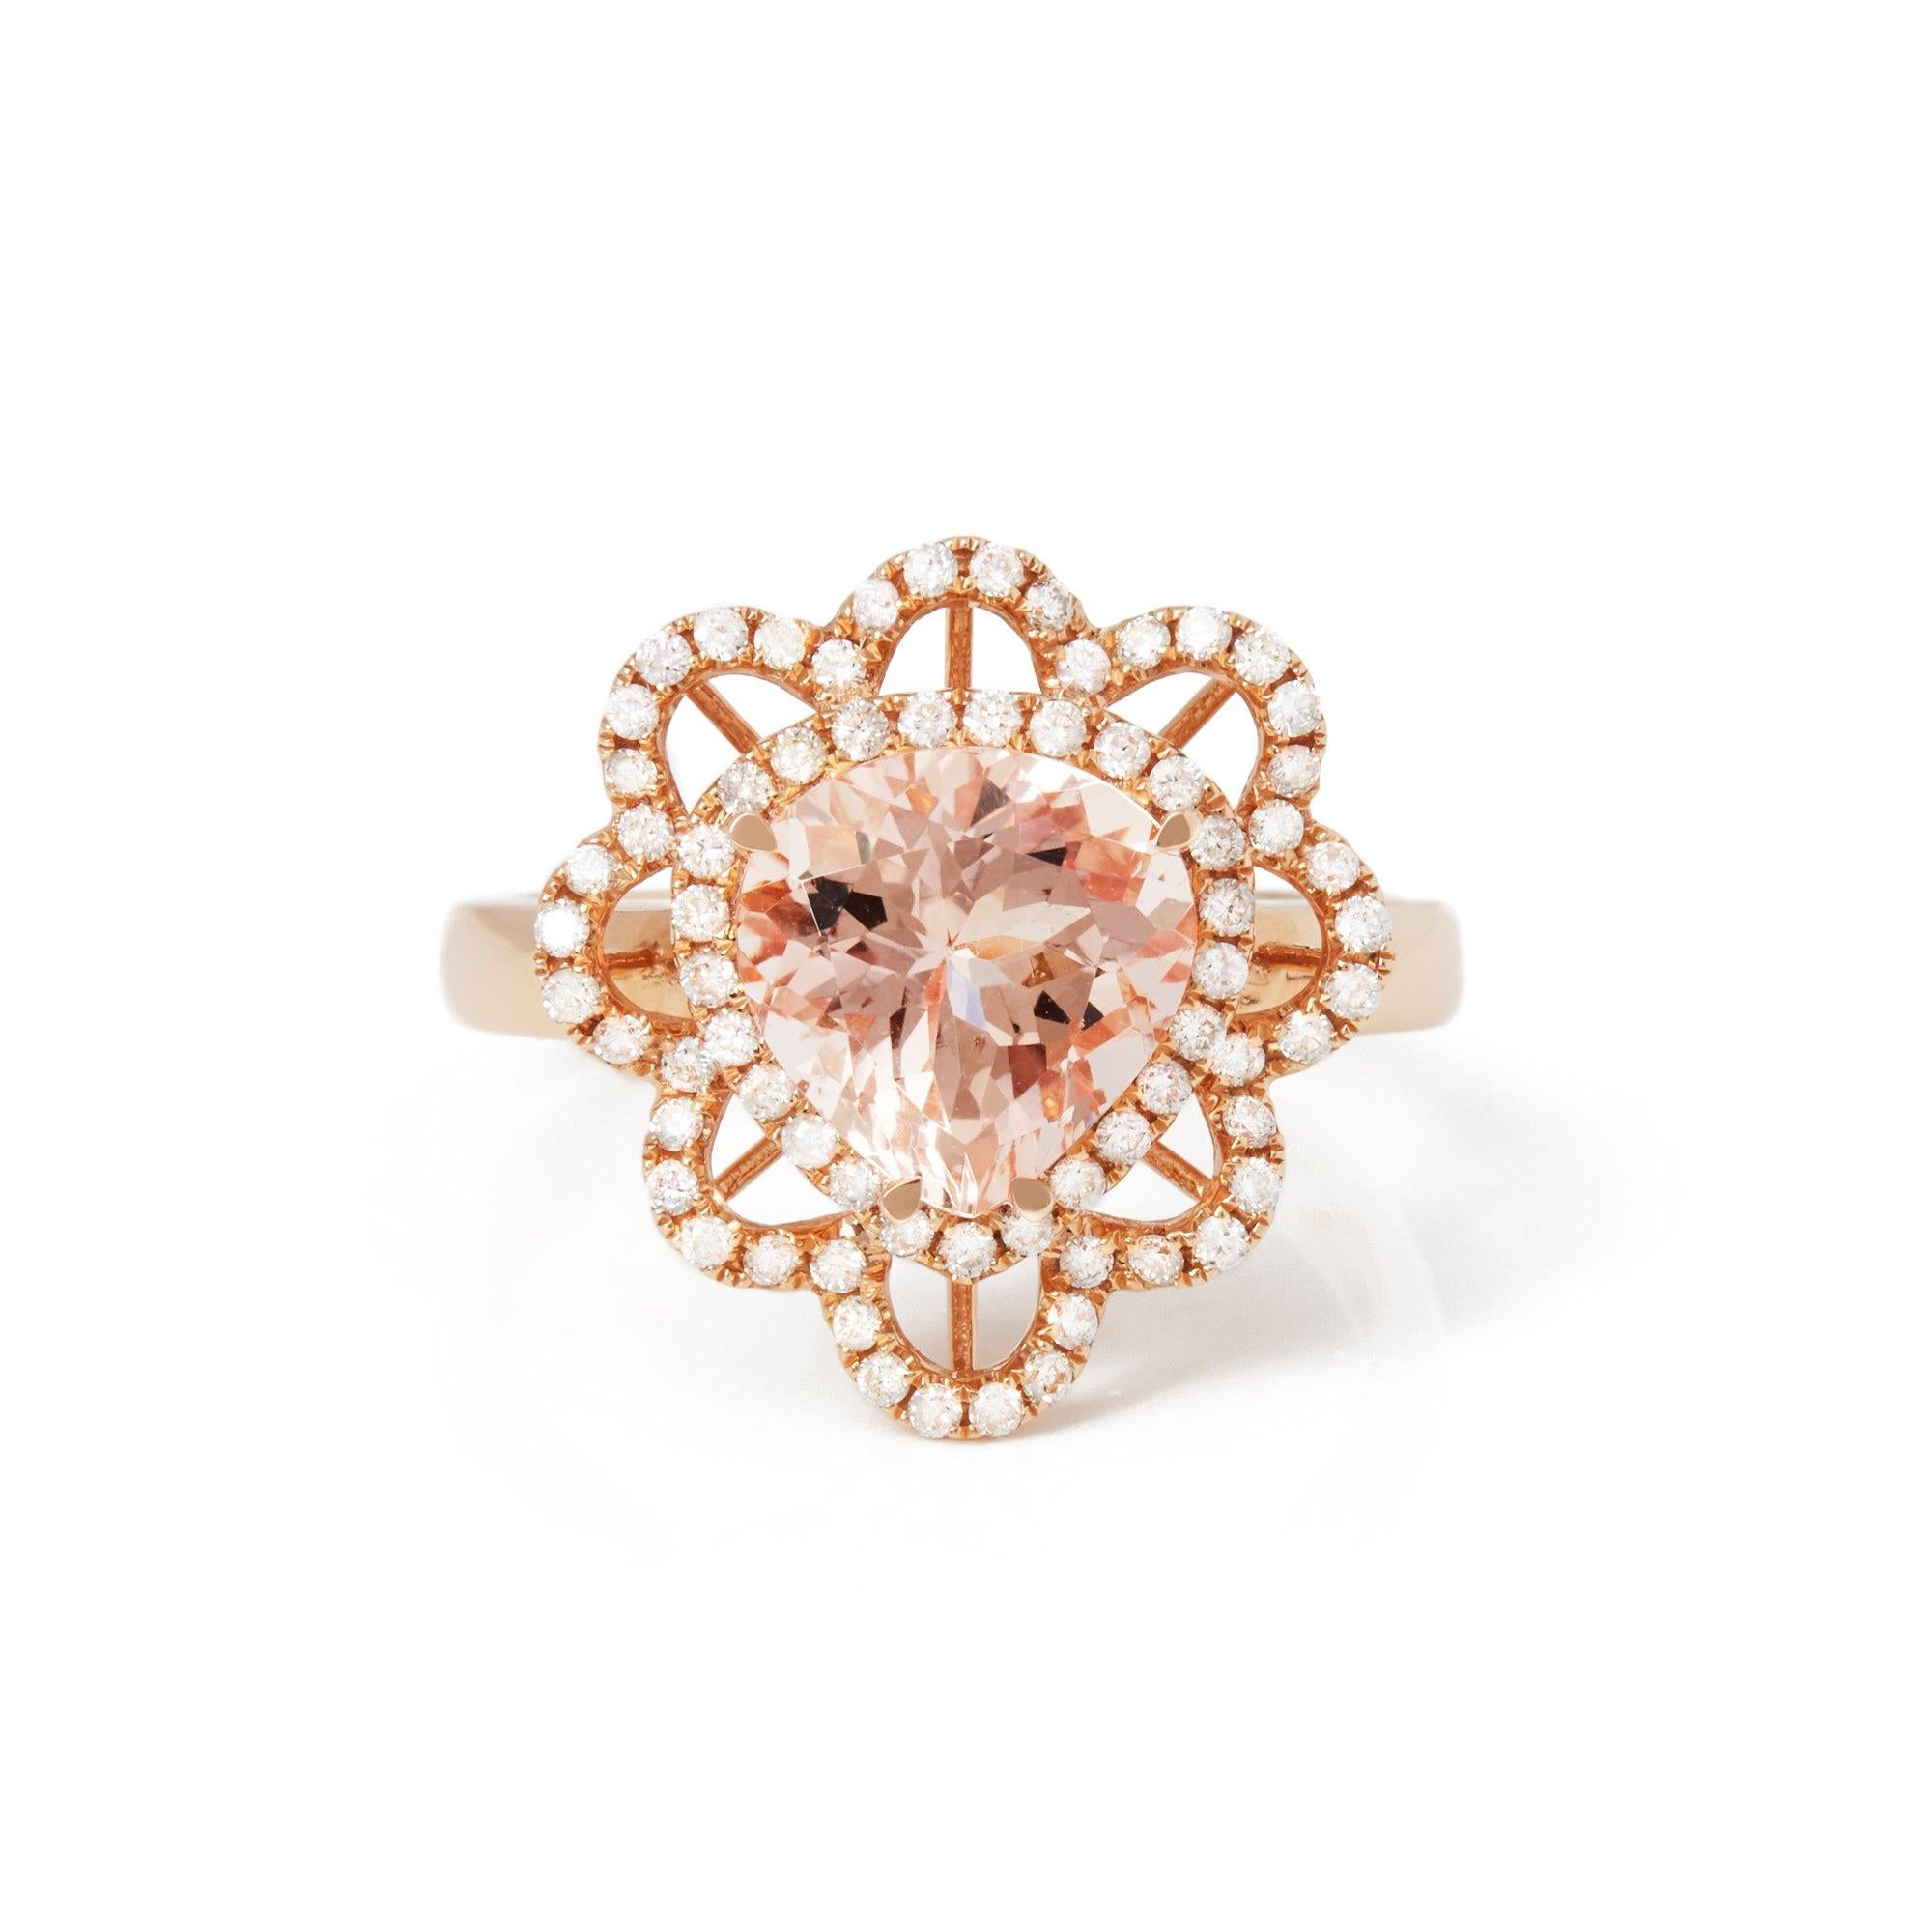 This Ring Designed by David Jerome is from his Private Collection and features One Trilliant Cut Morganite totalling 2.49cts Sourced in Brazil. Set with Round Brilliant Cut Diamonds totalling 0.45cts Mounted in an 18k Rose Gold Setting. UK Finger